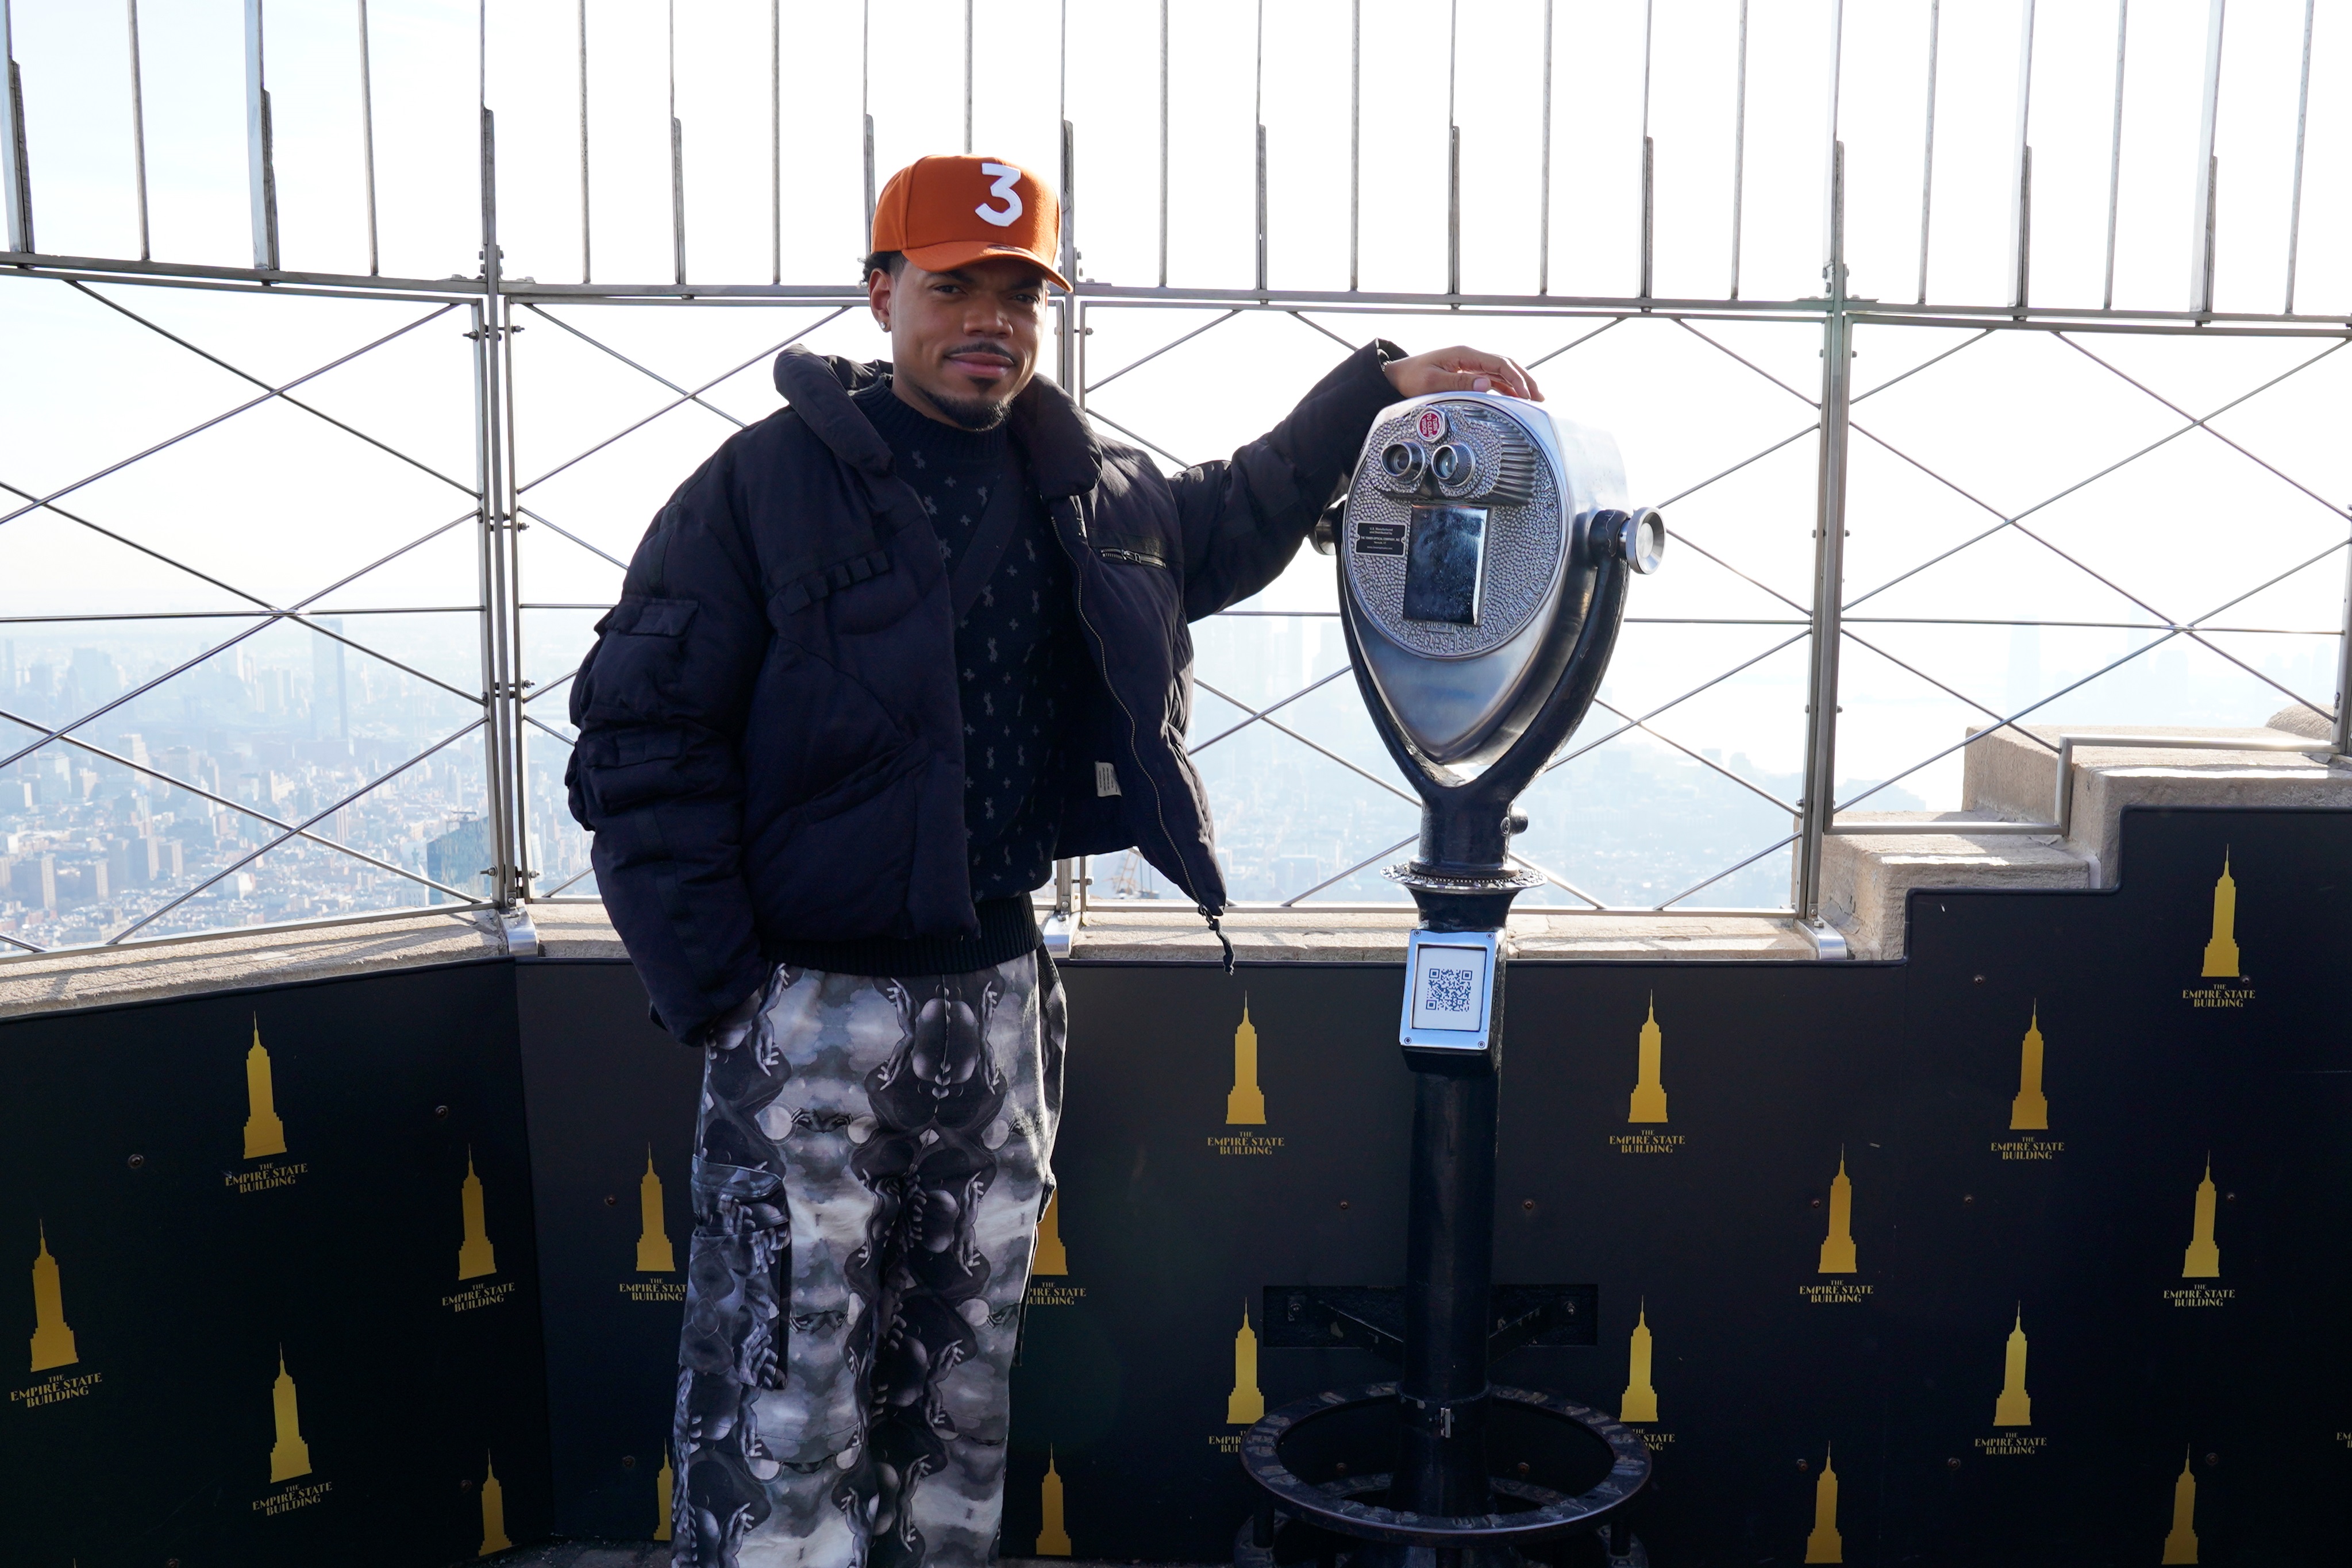 Chance The Rapper on the 86th Floor Observatory